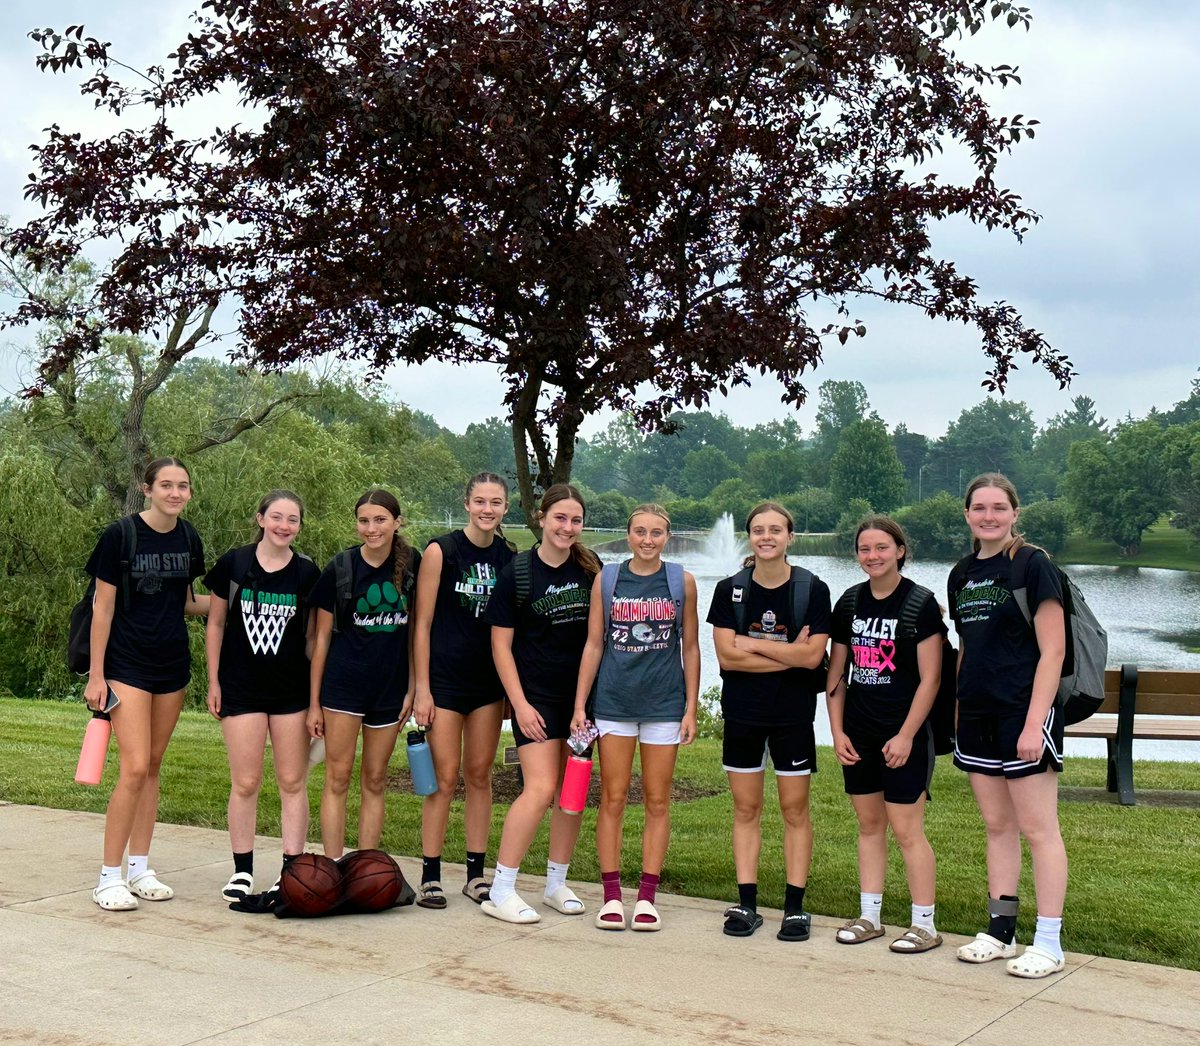 Lots of good work today at the @ursuline_wbb shootout. Thanks for hosting a great event. #InItTogether 

Also thanks to the @mog_ath_booster for making it possible for us to have these opportunities every summer 💚🤍